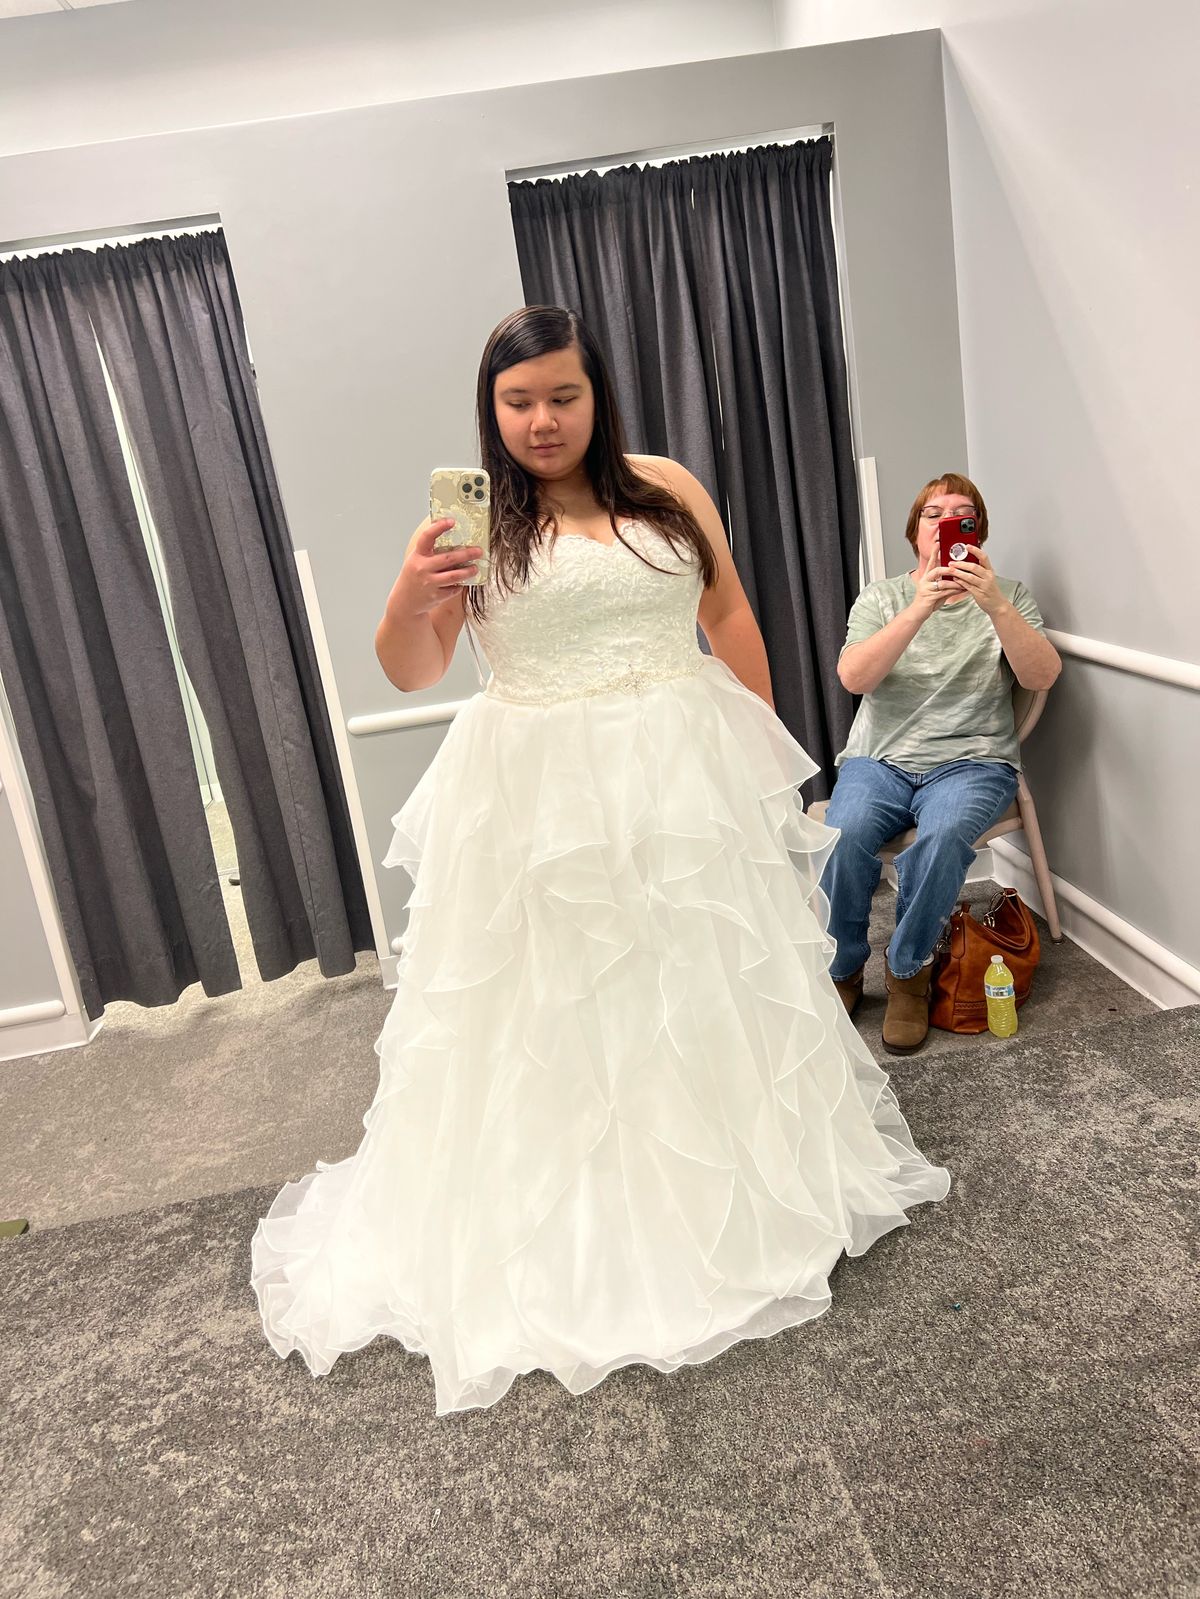 David's Bridal Plus Size 20 White Ball Gown on Queenly